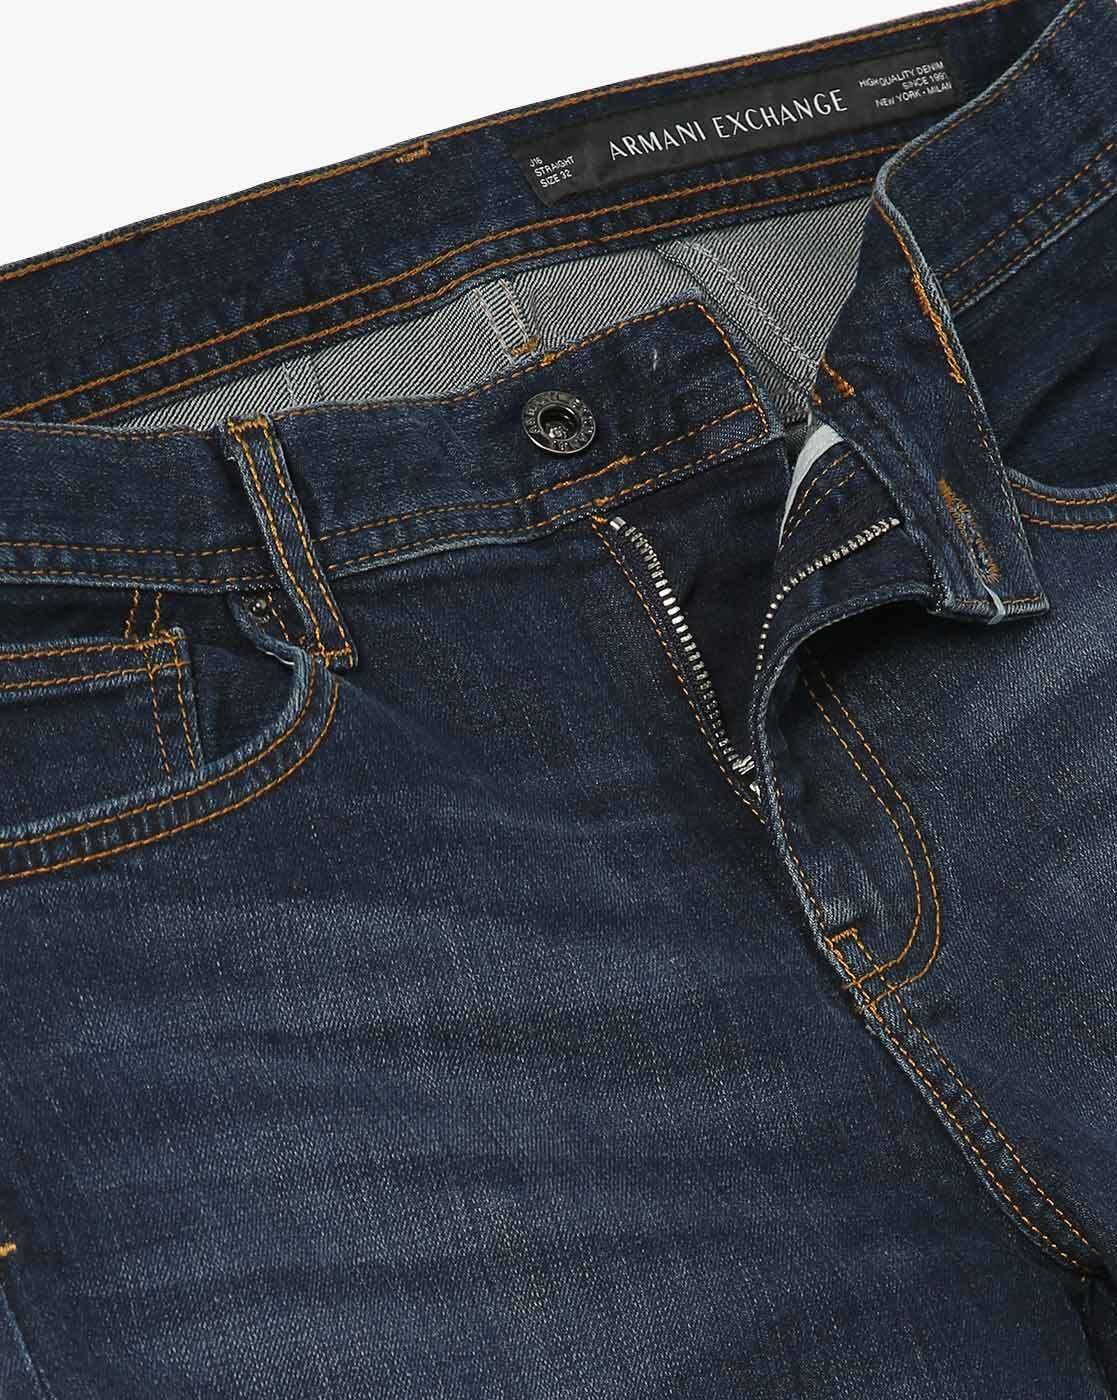 The Luxury Jeans Brands Making The Highest Quality Denim